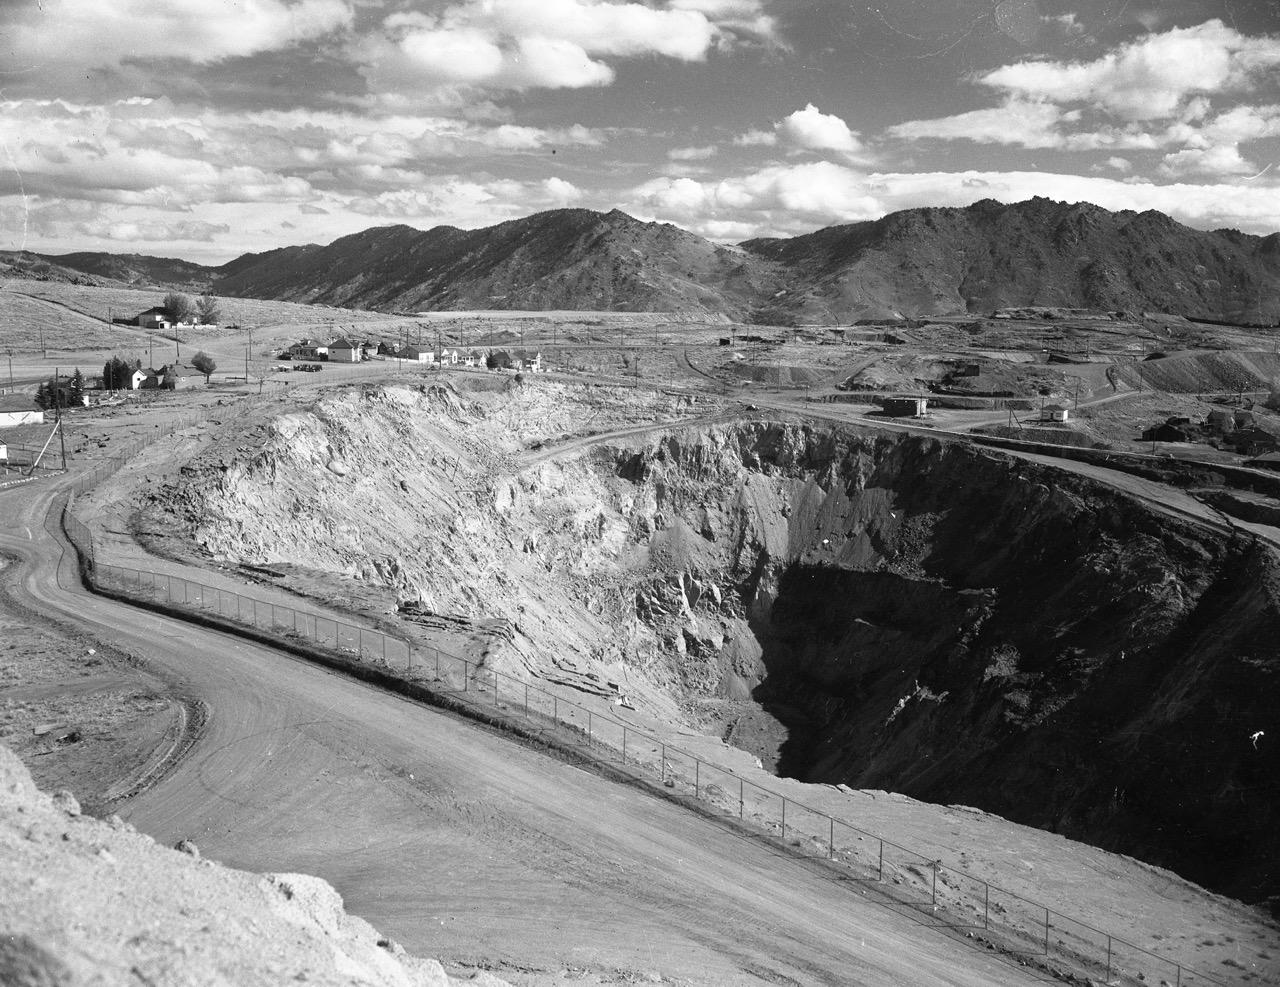 An open-pit copper mine with a caved-in wall gapes open in the foreground. A shadow blankets the southern rim of the pit. The heavily mined ground beyond the pit slopes up to meet the Continental Divide, from which water flows in two directions. Here is the source of Silver Bow Creek, draining into the Pacific Ocean.